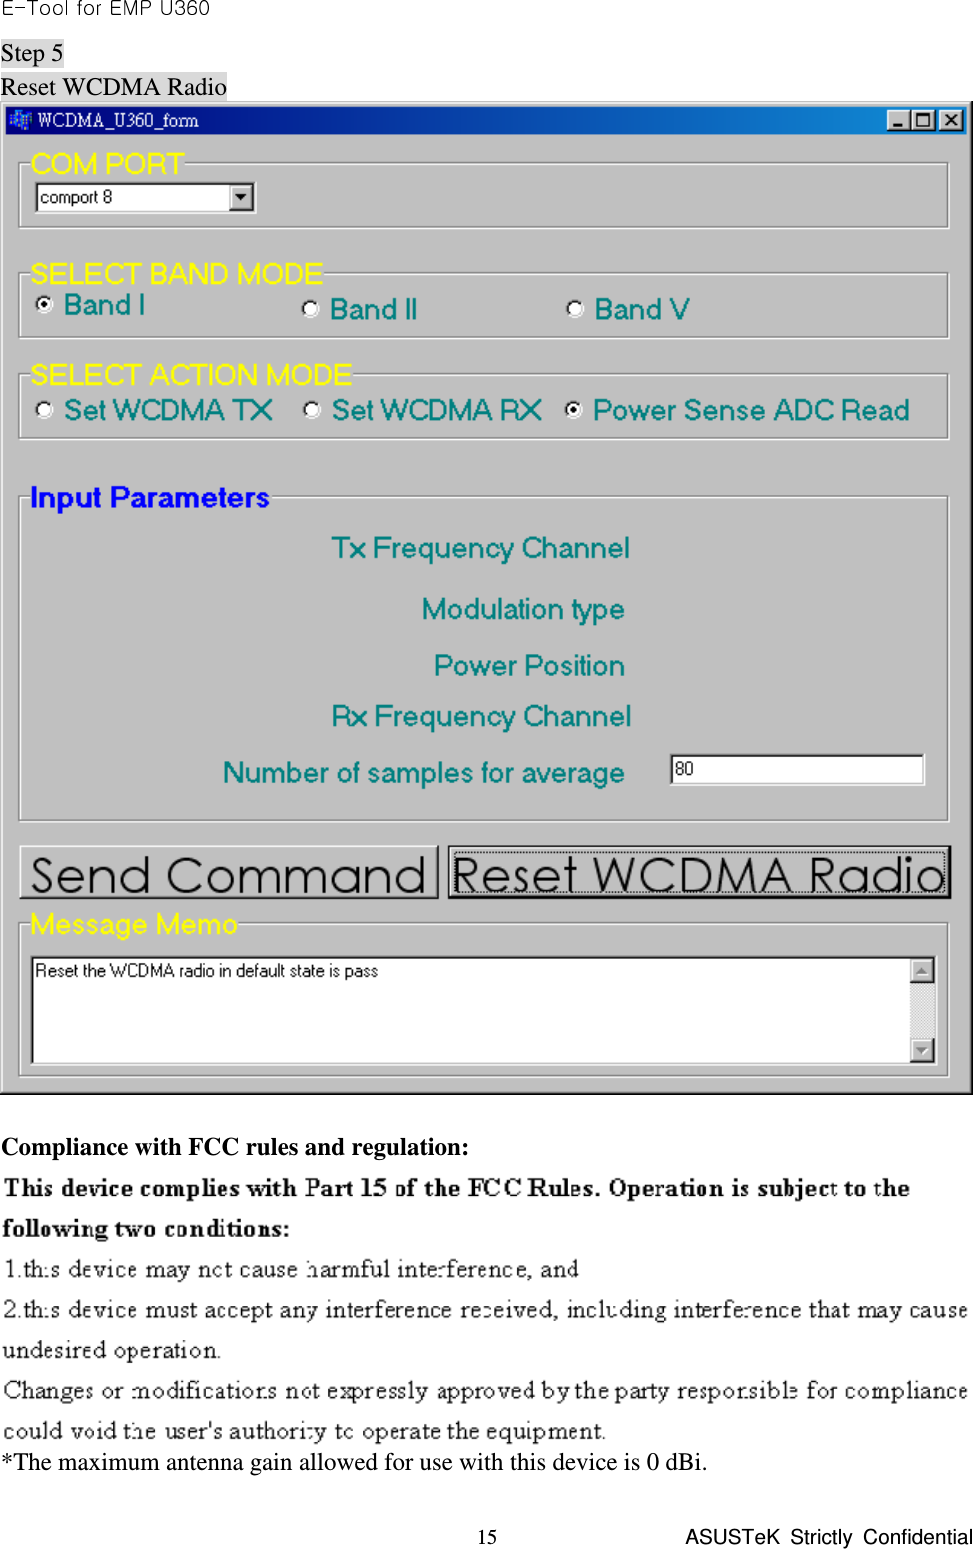  ASUSTeK  Strictly  Confidential 15Step 5 Reset WCDMA Radio     Compliance with FCC rules and regulation:  *The maximum antenna gain allowed for use with this device is 0 dBi.   